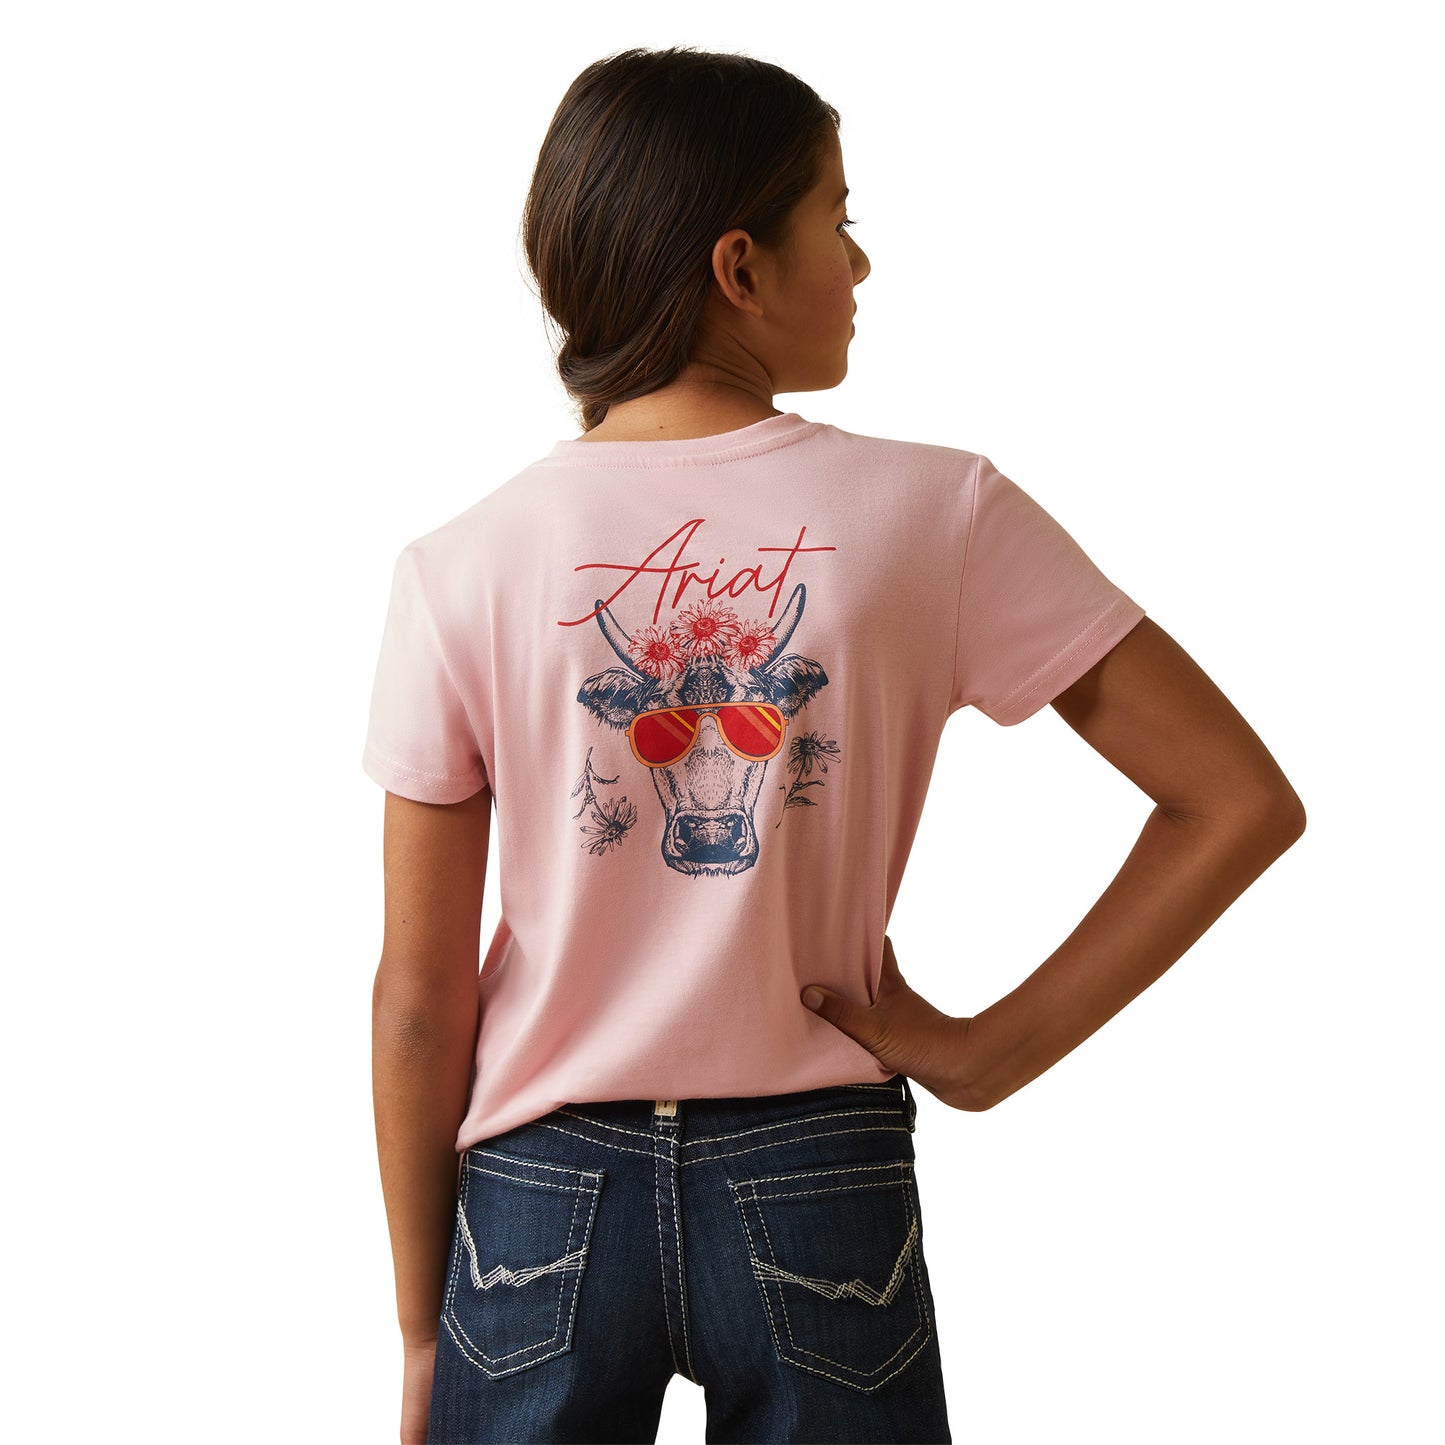 Ariat® Youth Girl's R.E.A.L™ Cool Cow Coral Blush T-Shirt 10043631